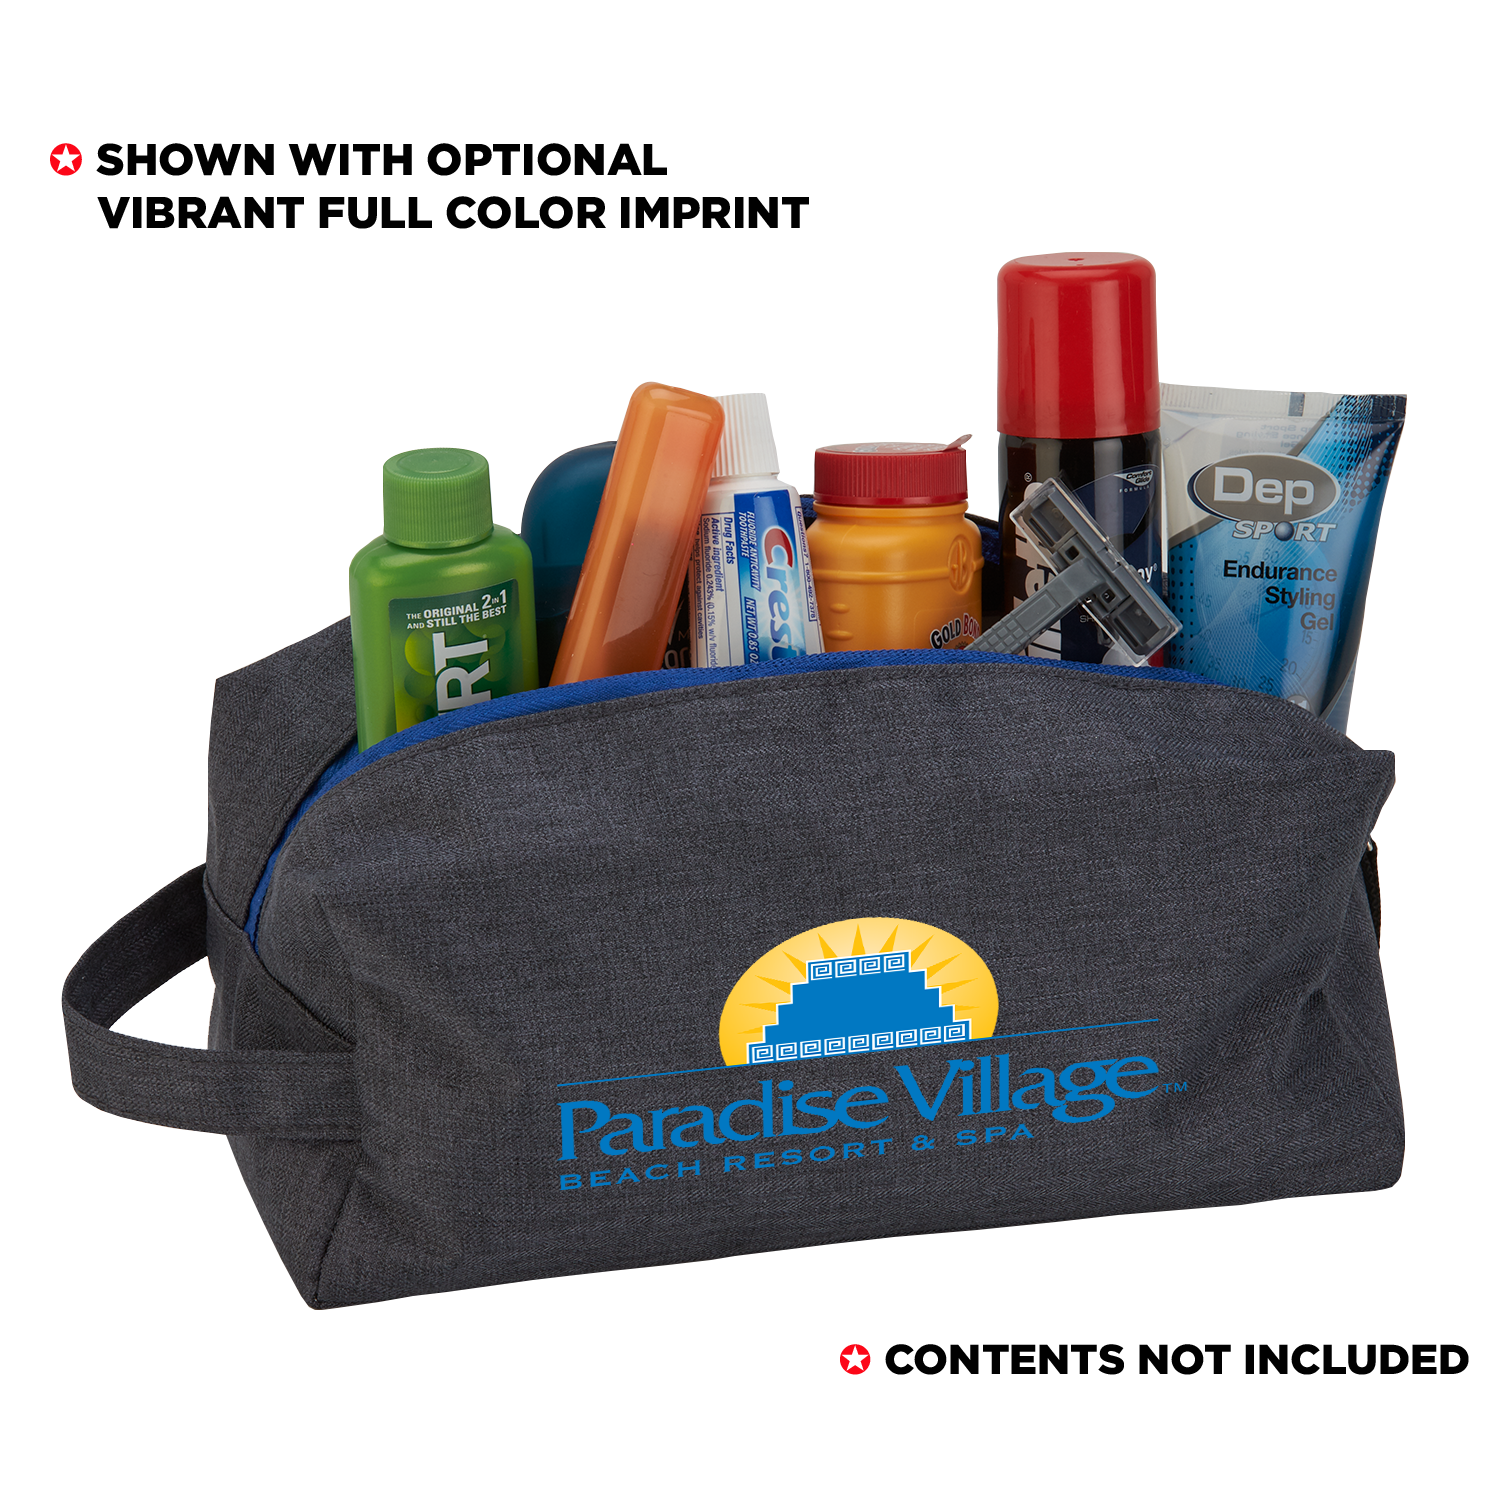 Evans Manufacturing - Promotional Products Supplier, Plastic